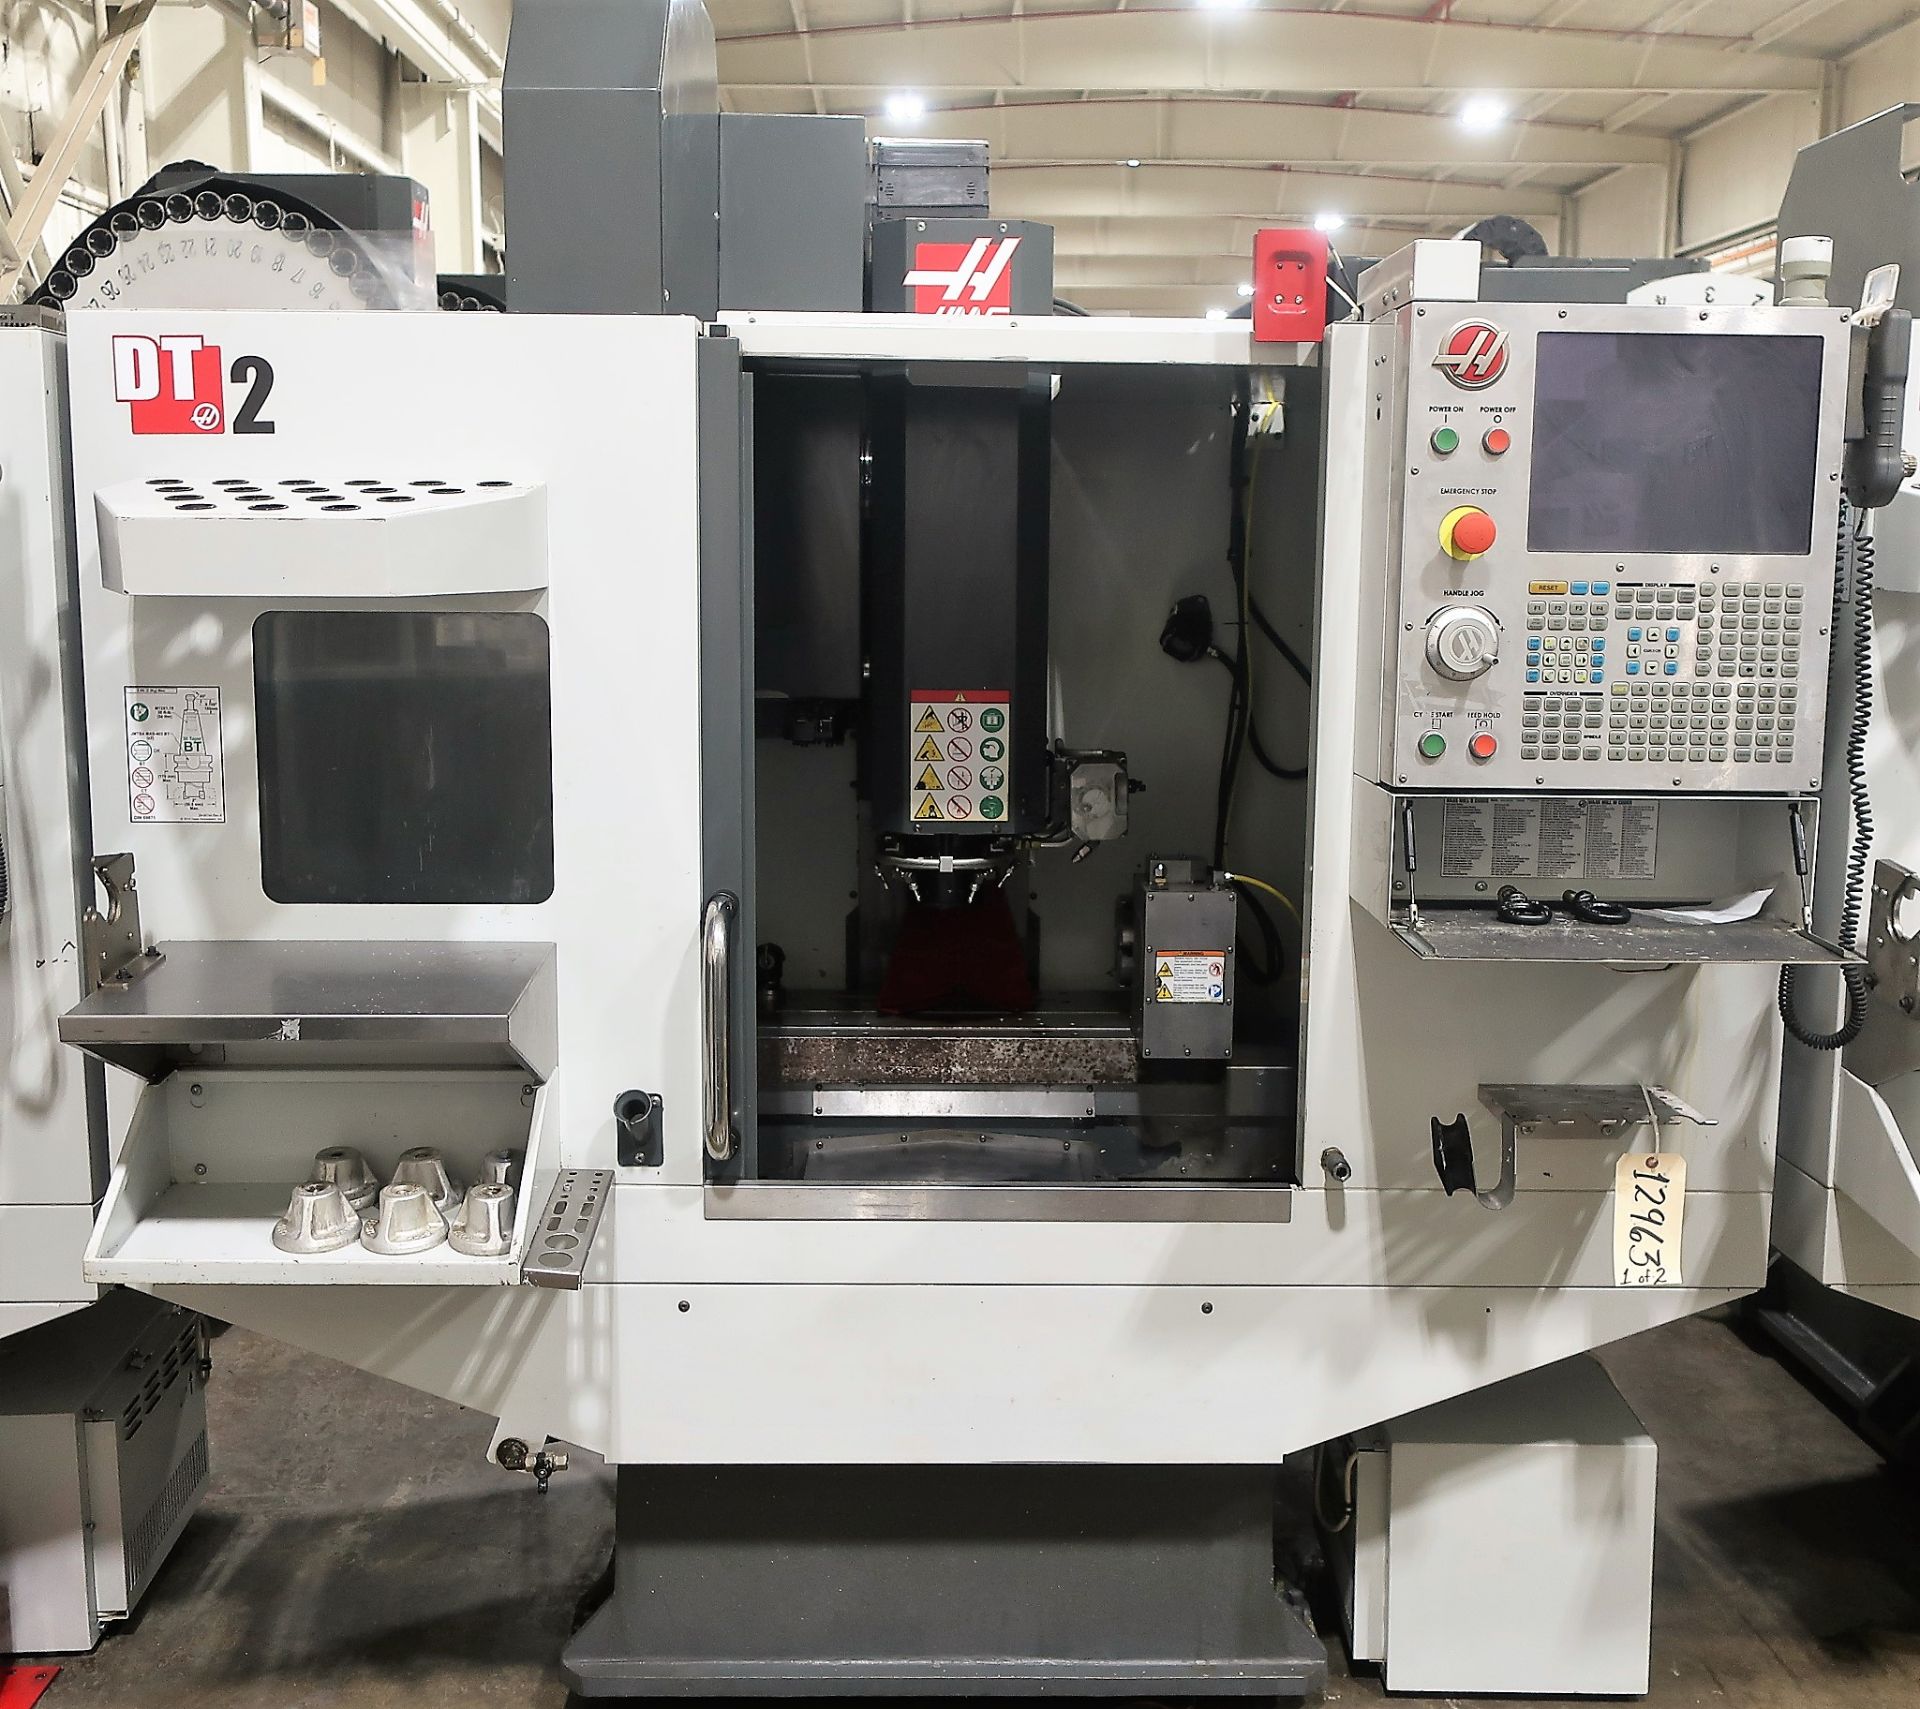 HAAS DT-2 4-AXIS CNC DRILL/TAP MILL VERTICAL MACHINING CENTER, S/N 1131126, NEW 2016